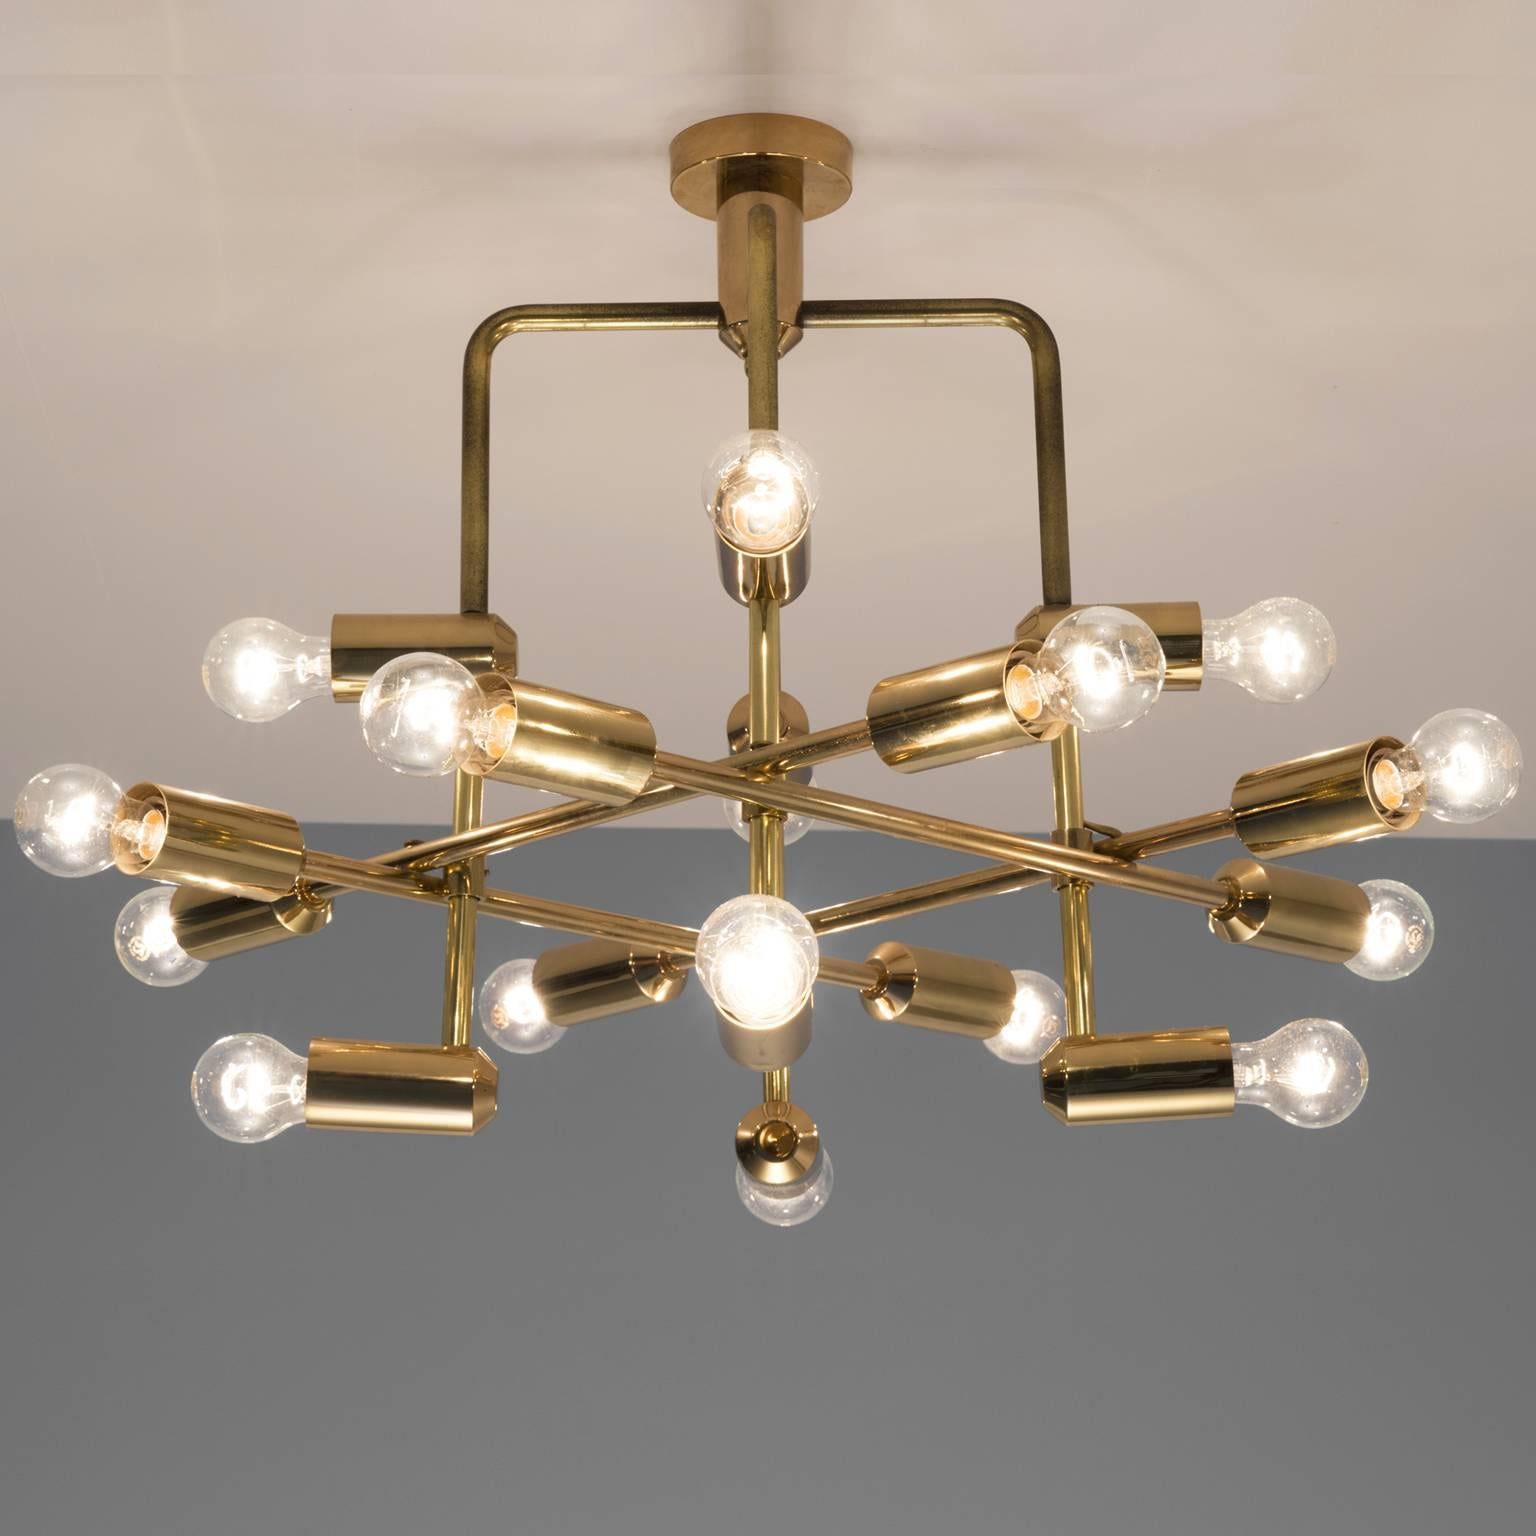 Swiss chandelier in brass, Switzerland, 1960s.

This delicate chandelier is minimalist yet warm. The light consists of multiple light bulbs that are placed on the ends of brass horizontal beam. The beams form a cross-like pattern. The light source